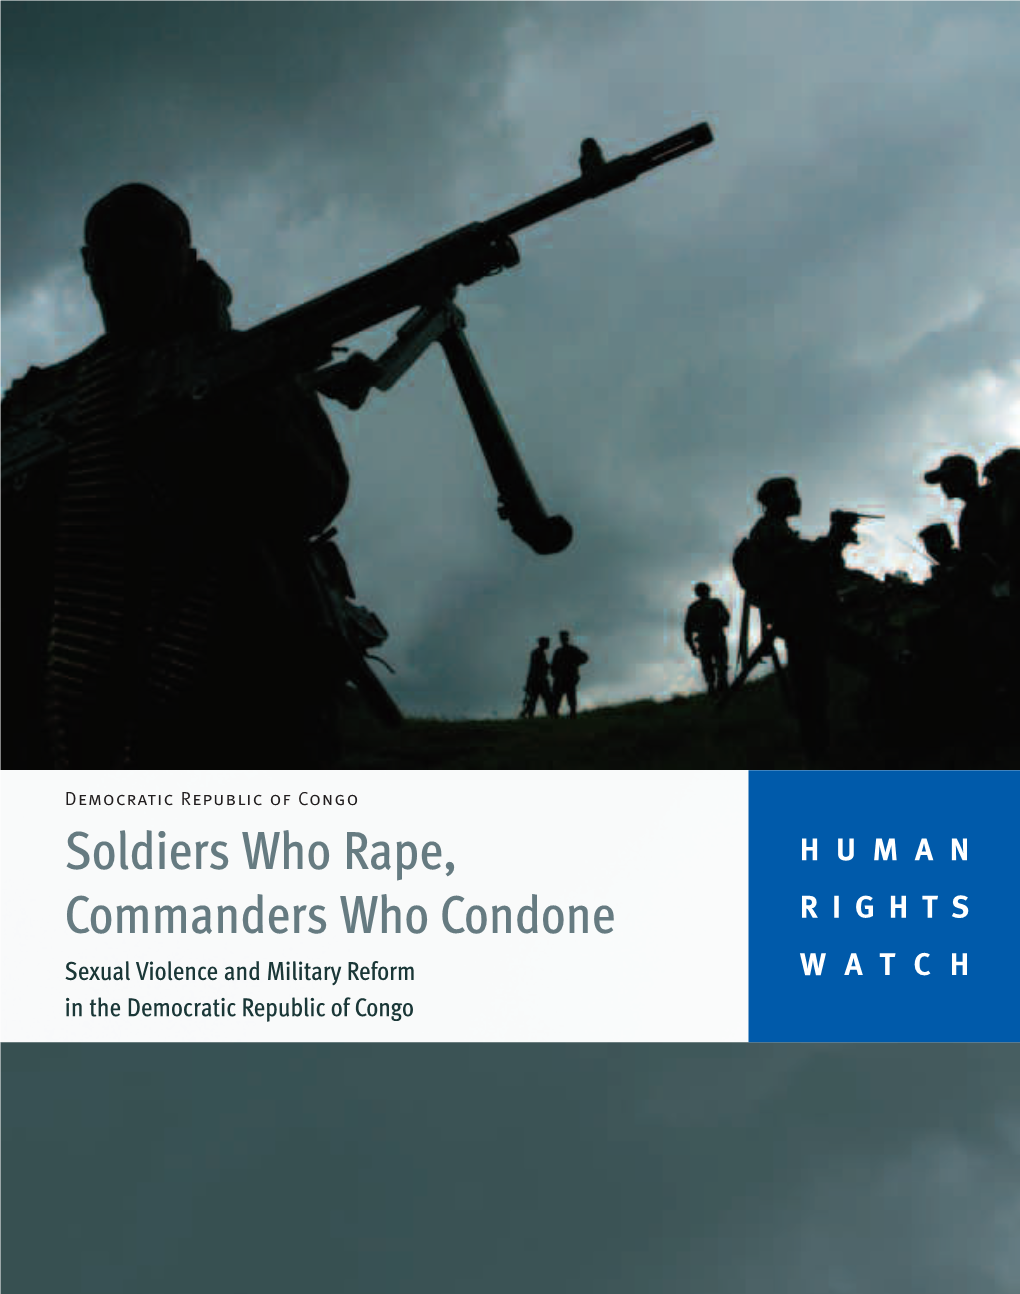 Soldiers Who Rape, Commanders Who Condone